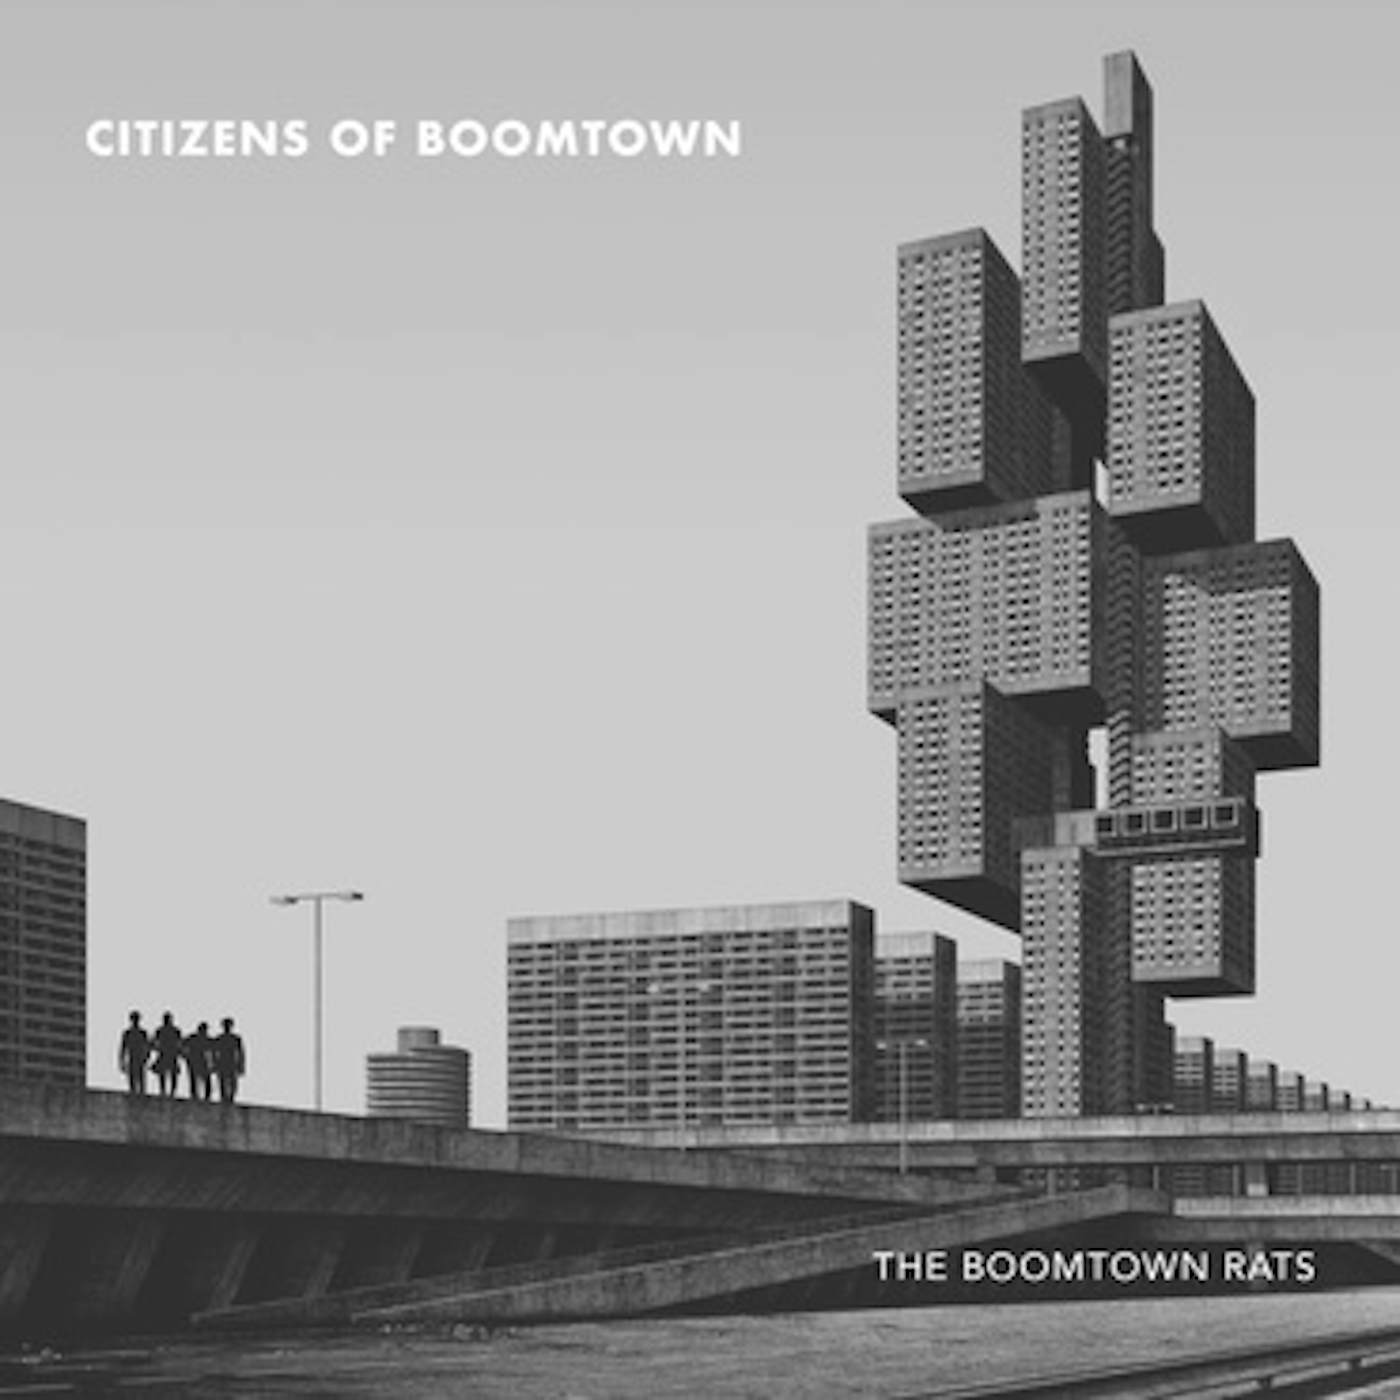 The Boomtown Rats Citizens of Boomtown Vinyl Record